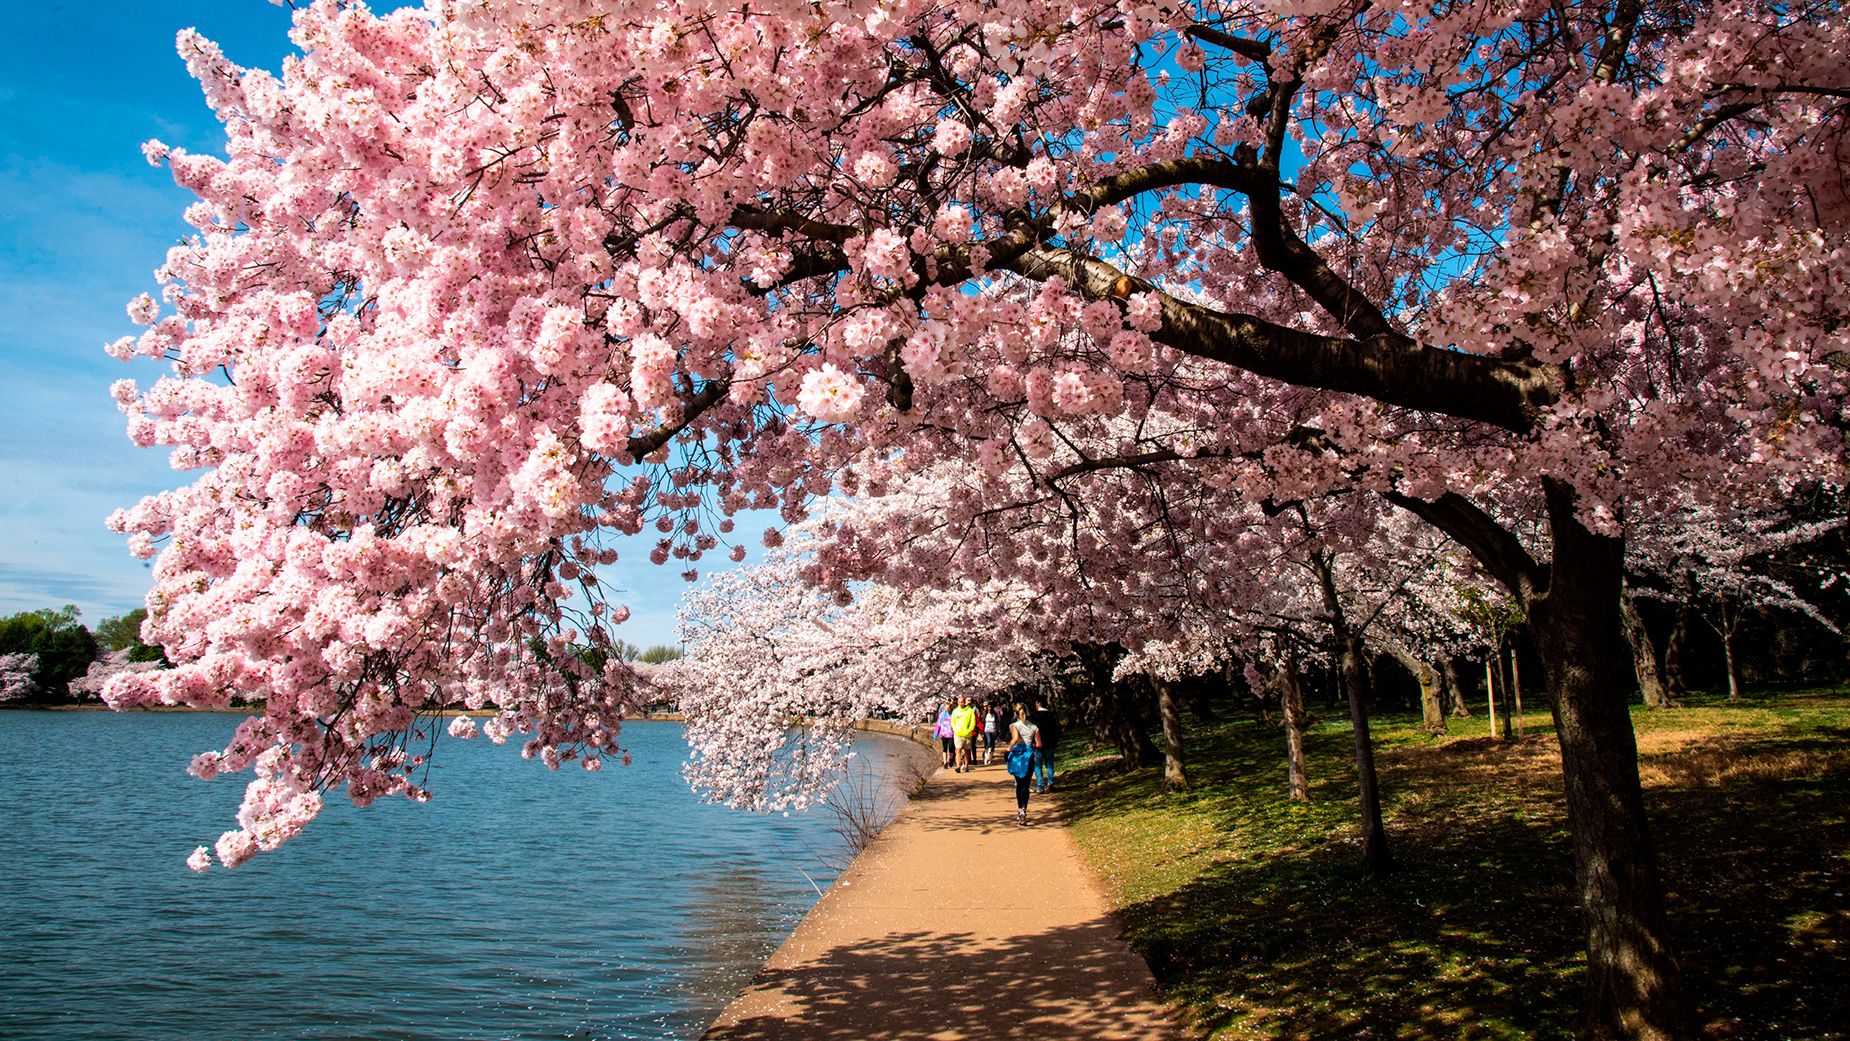 Hitting peak time for the cherry tree bloom in Washington, D.C., can be a little tricky. But if you do, the visual reward is magnificent.